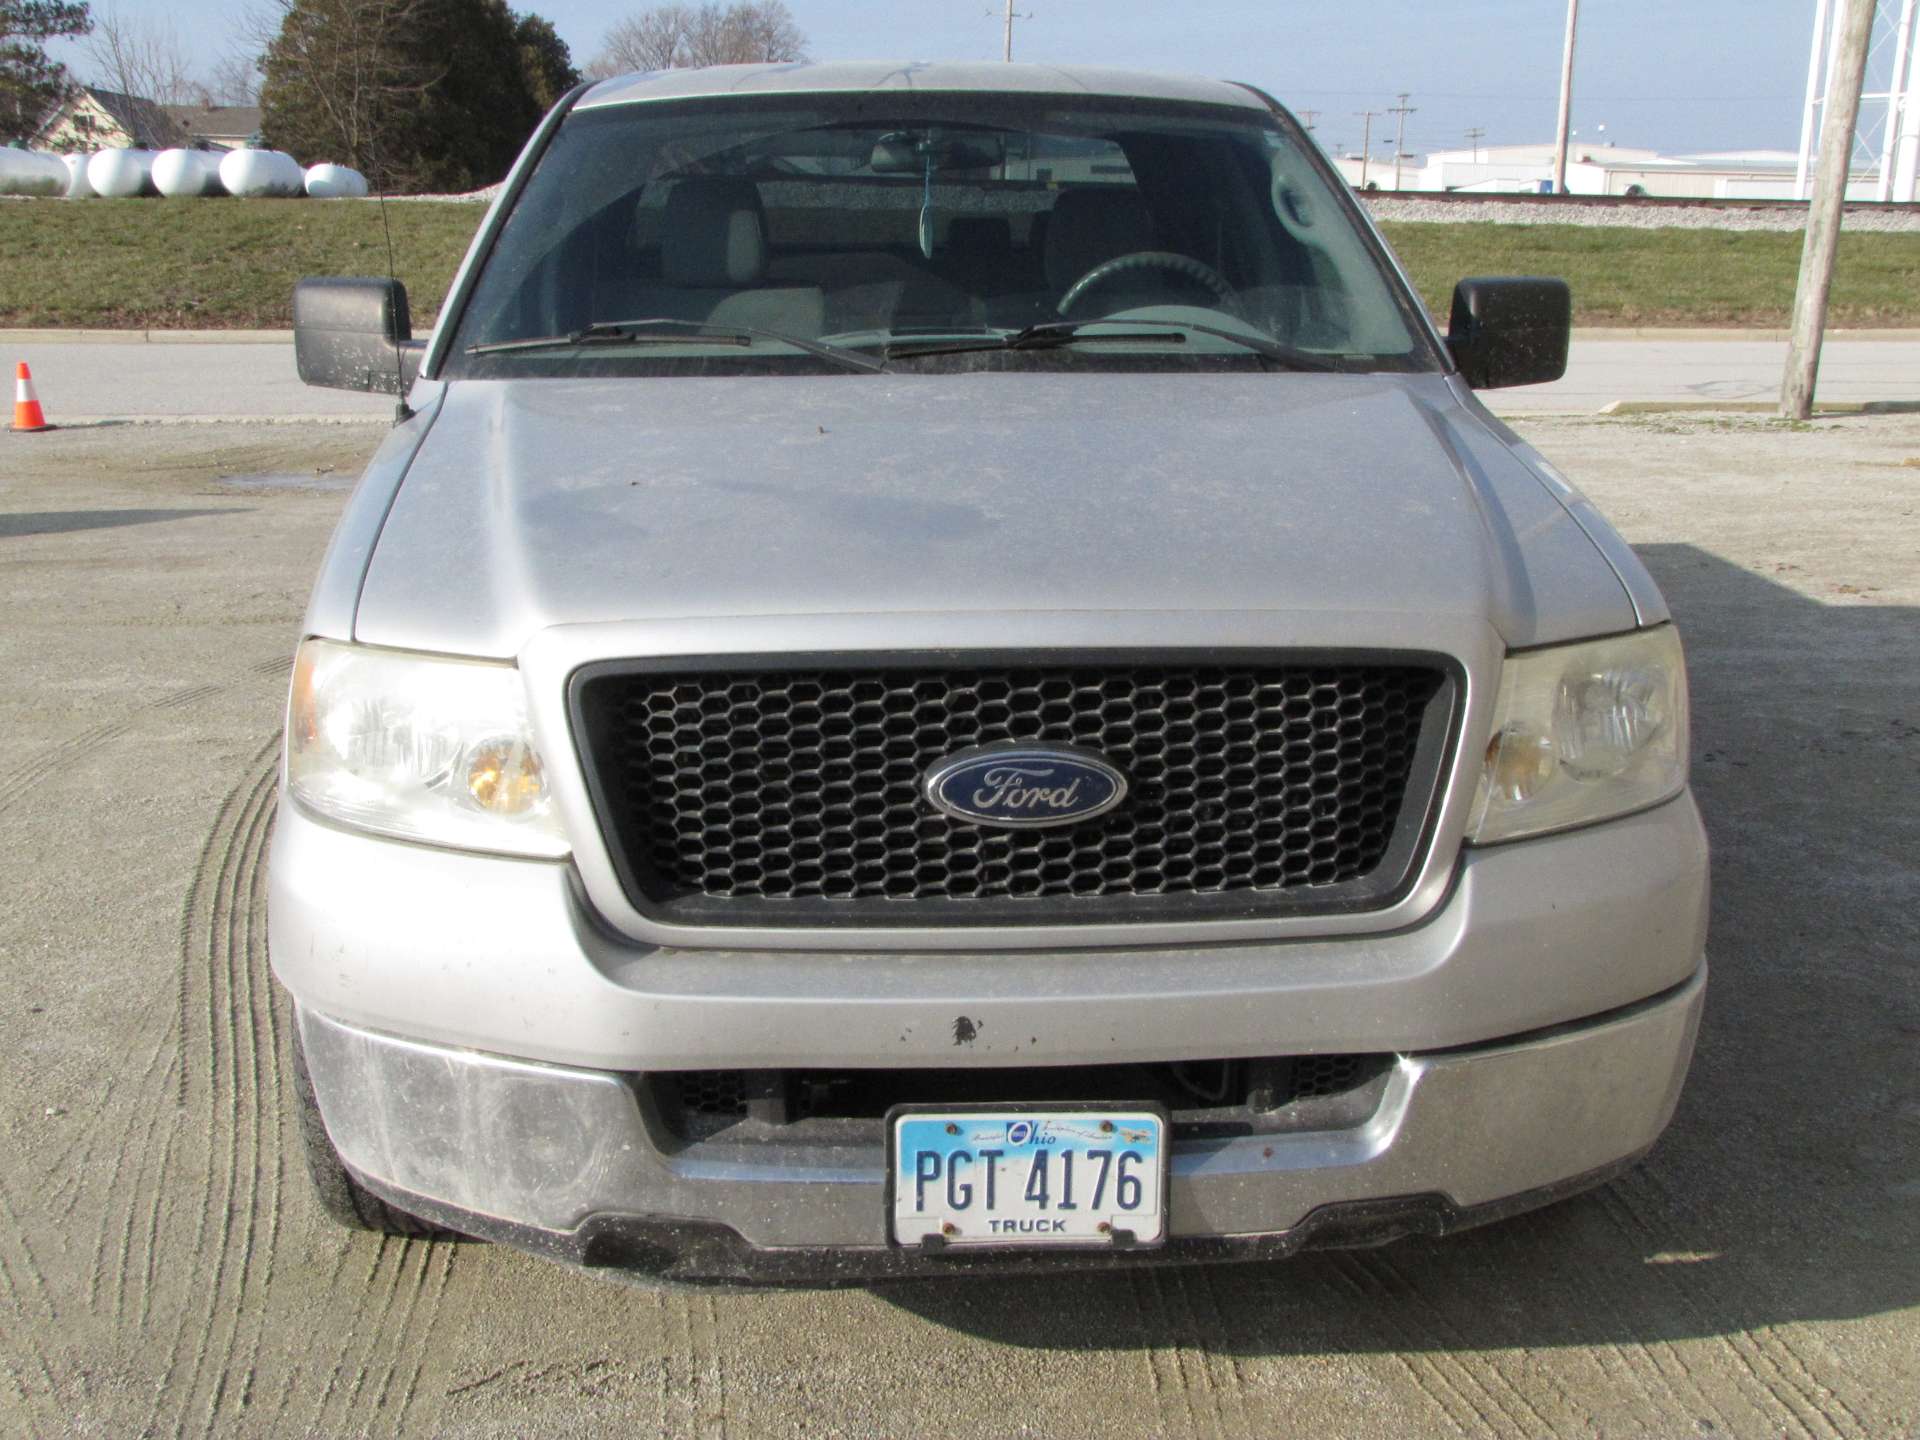 2005 Ford F-150 XLT pickup truck - Image 28 of 89